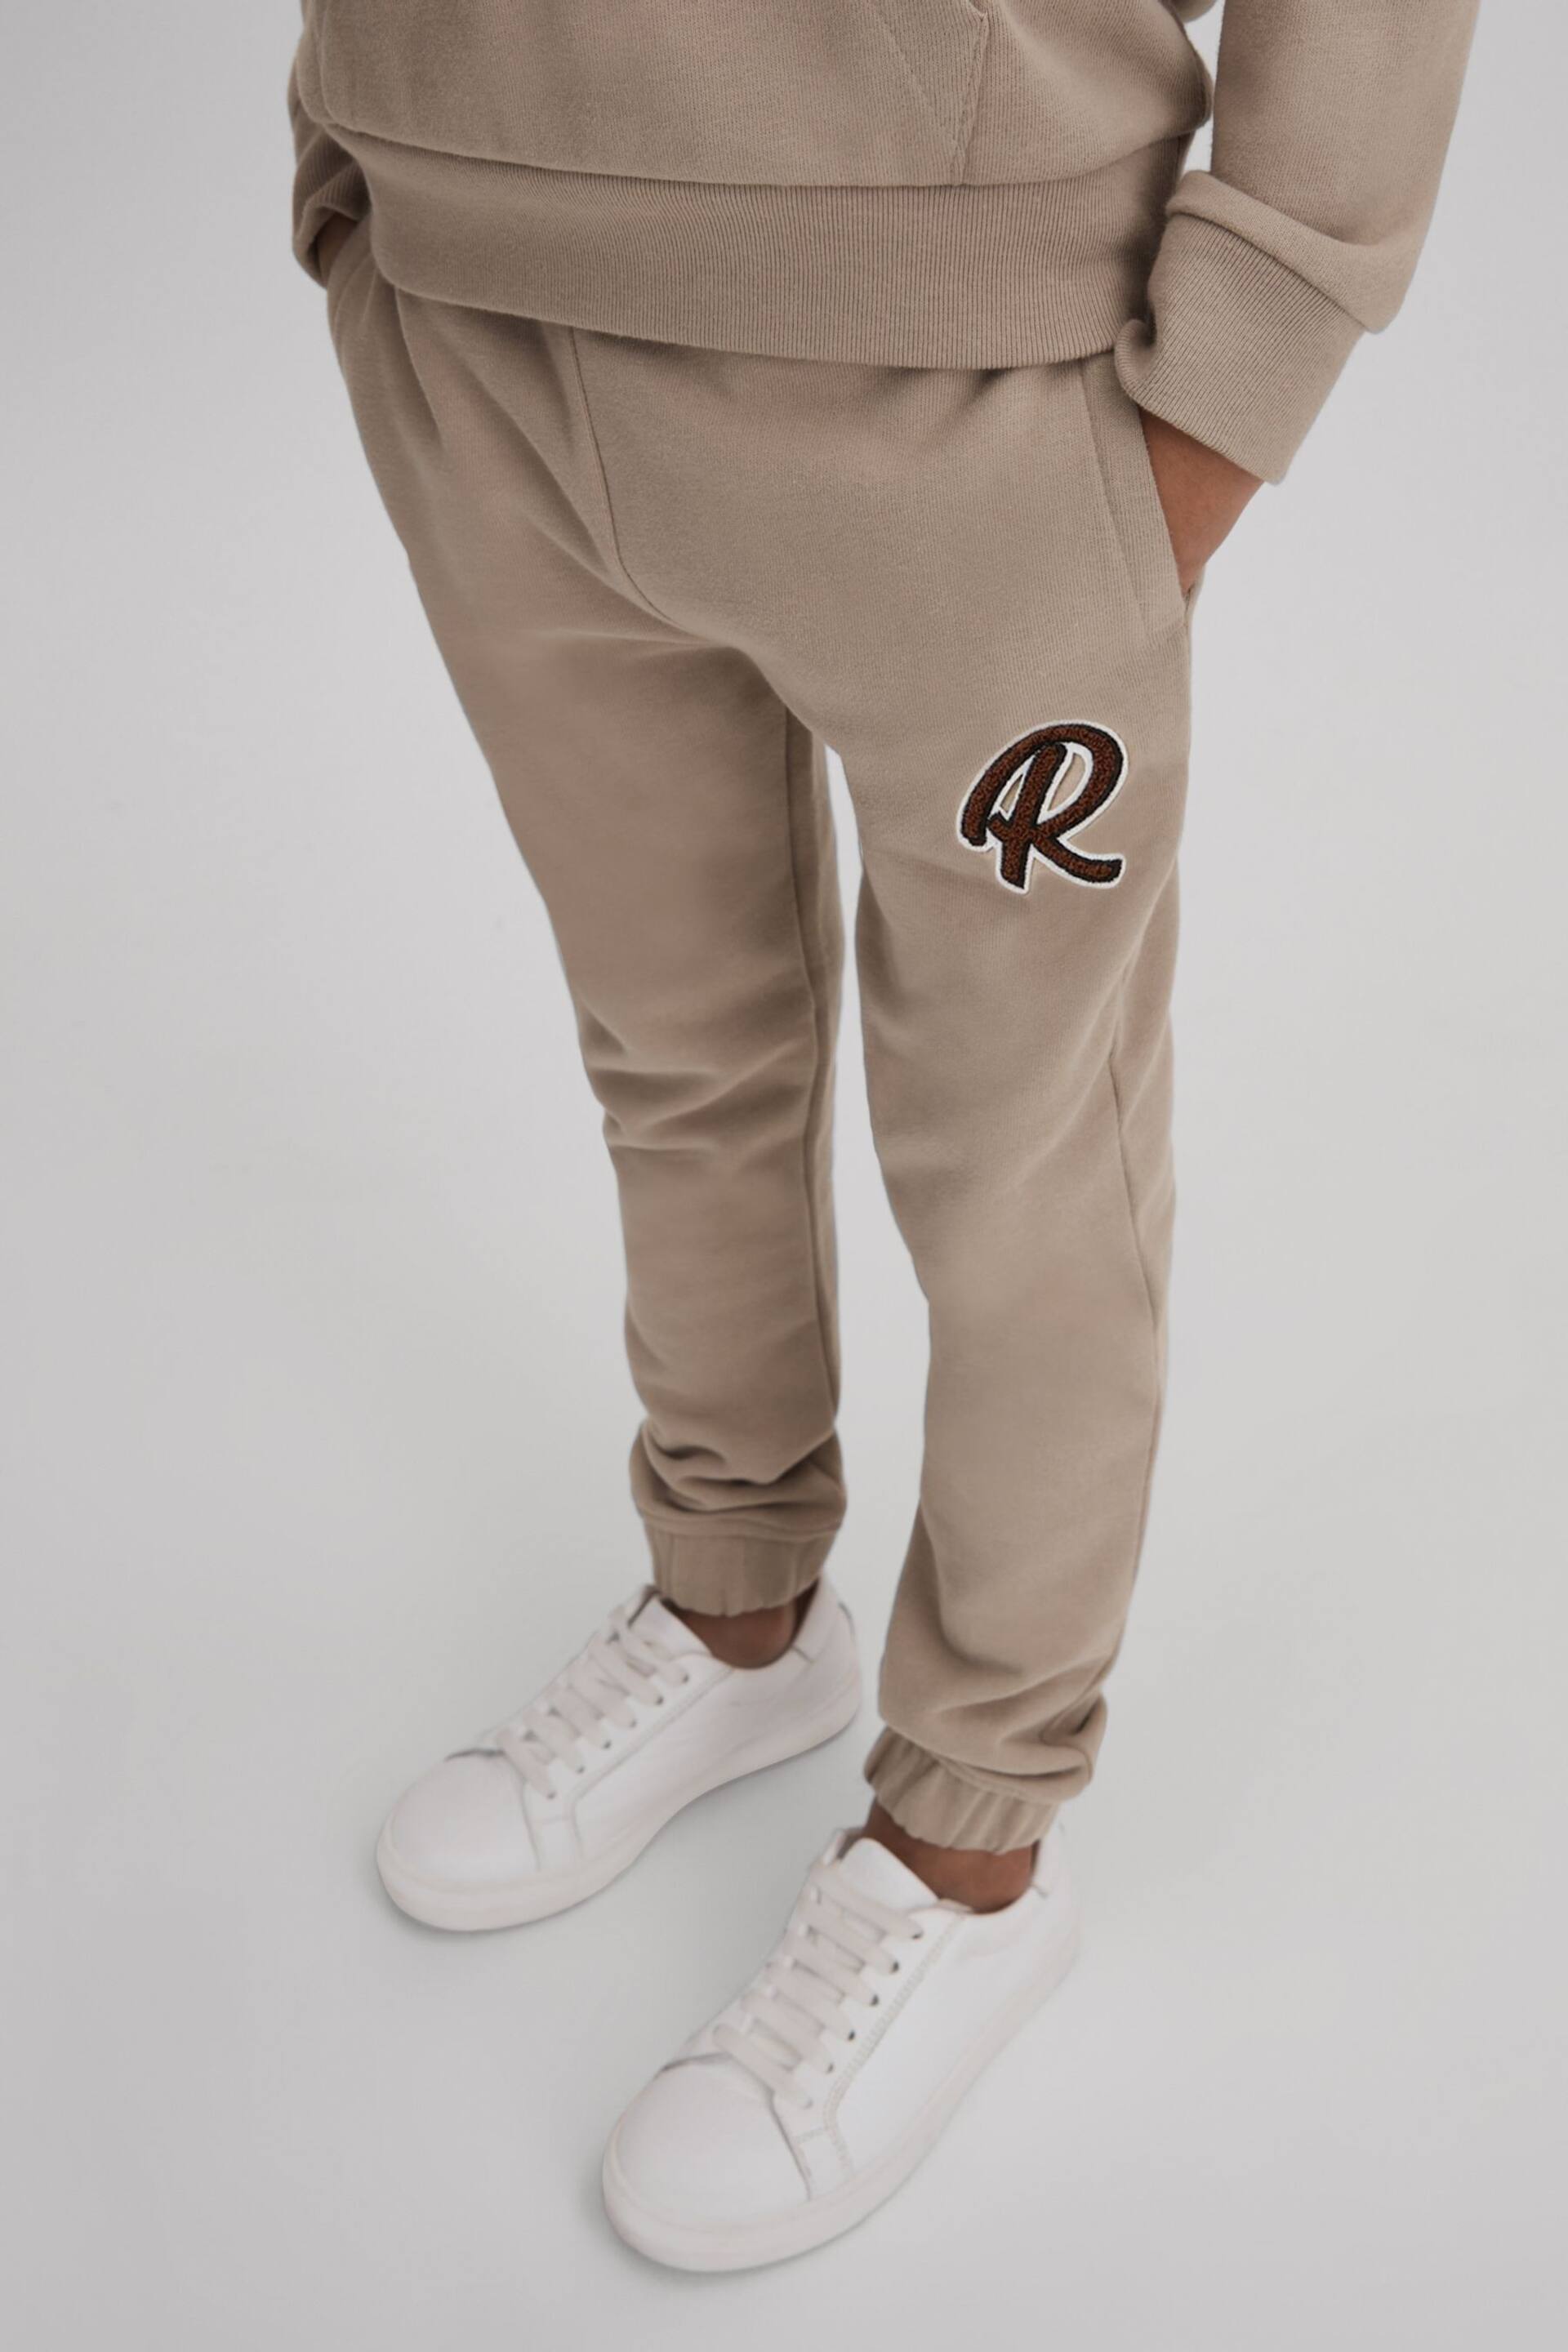 Reiss Taupe Toby Junior Cotton Elasticated Waist Motif Joggers - Image 3 of 4